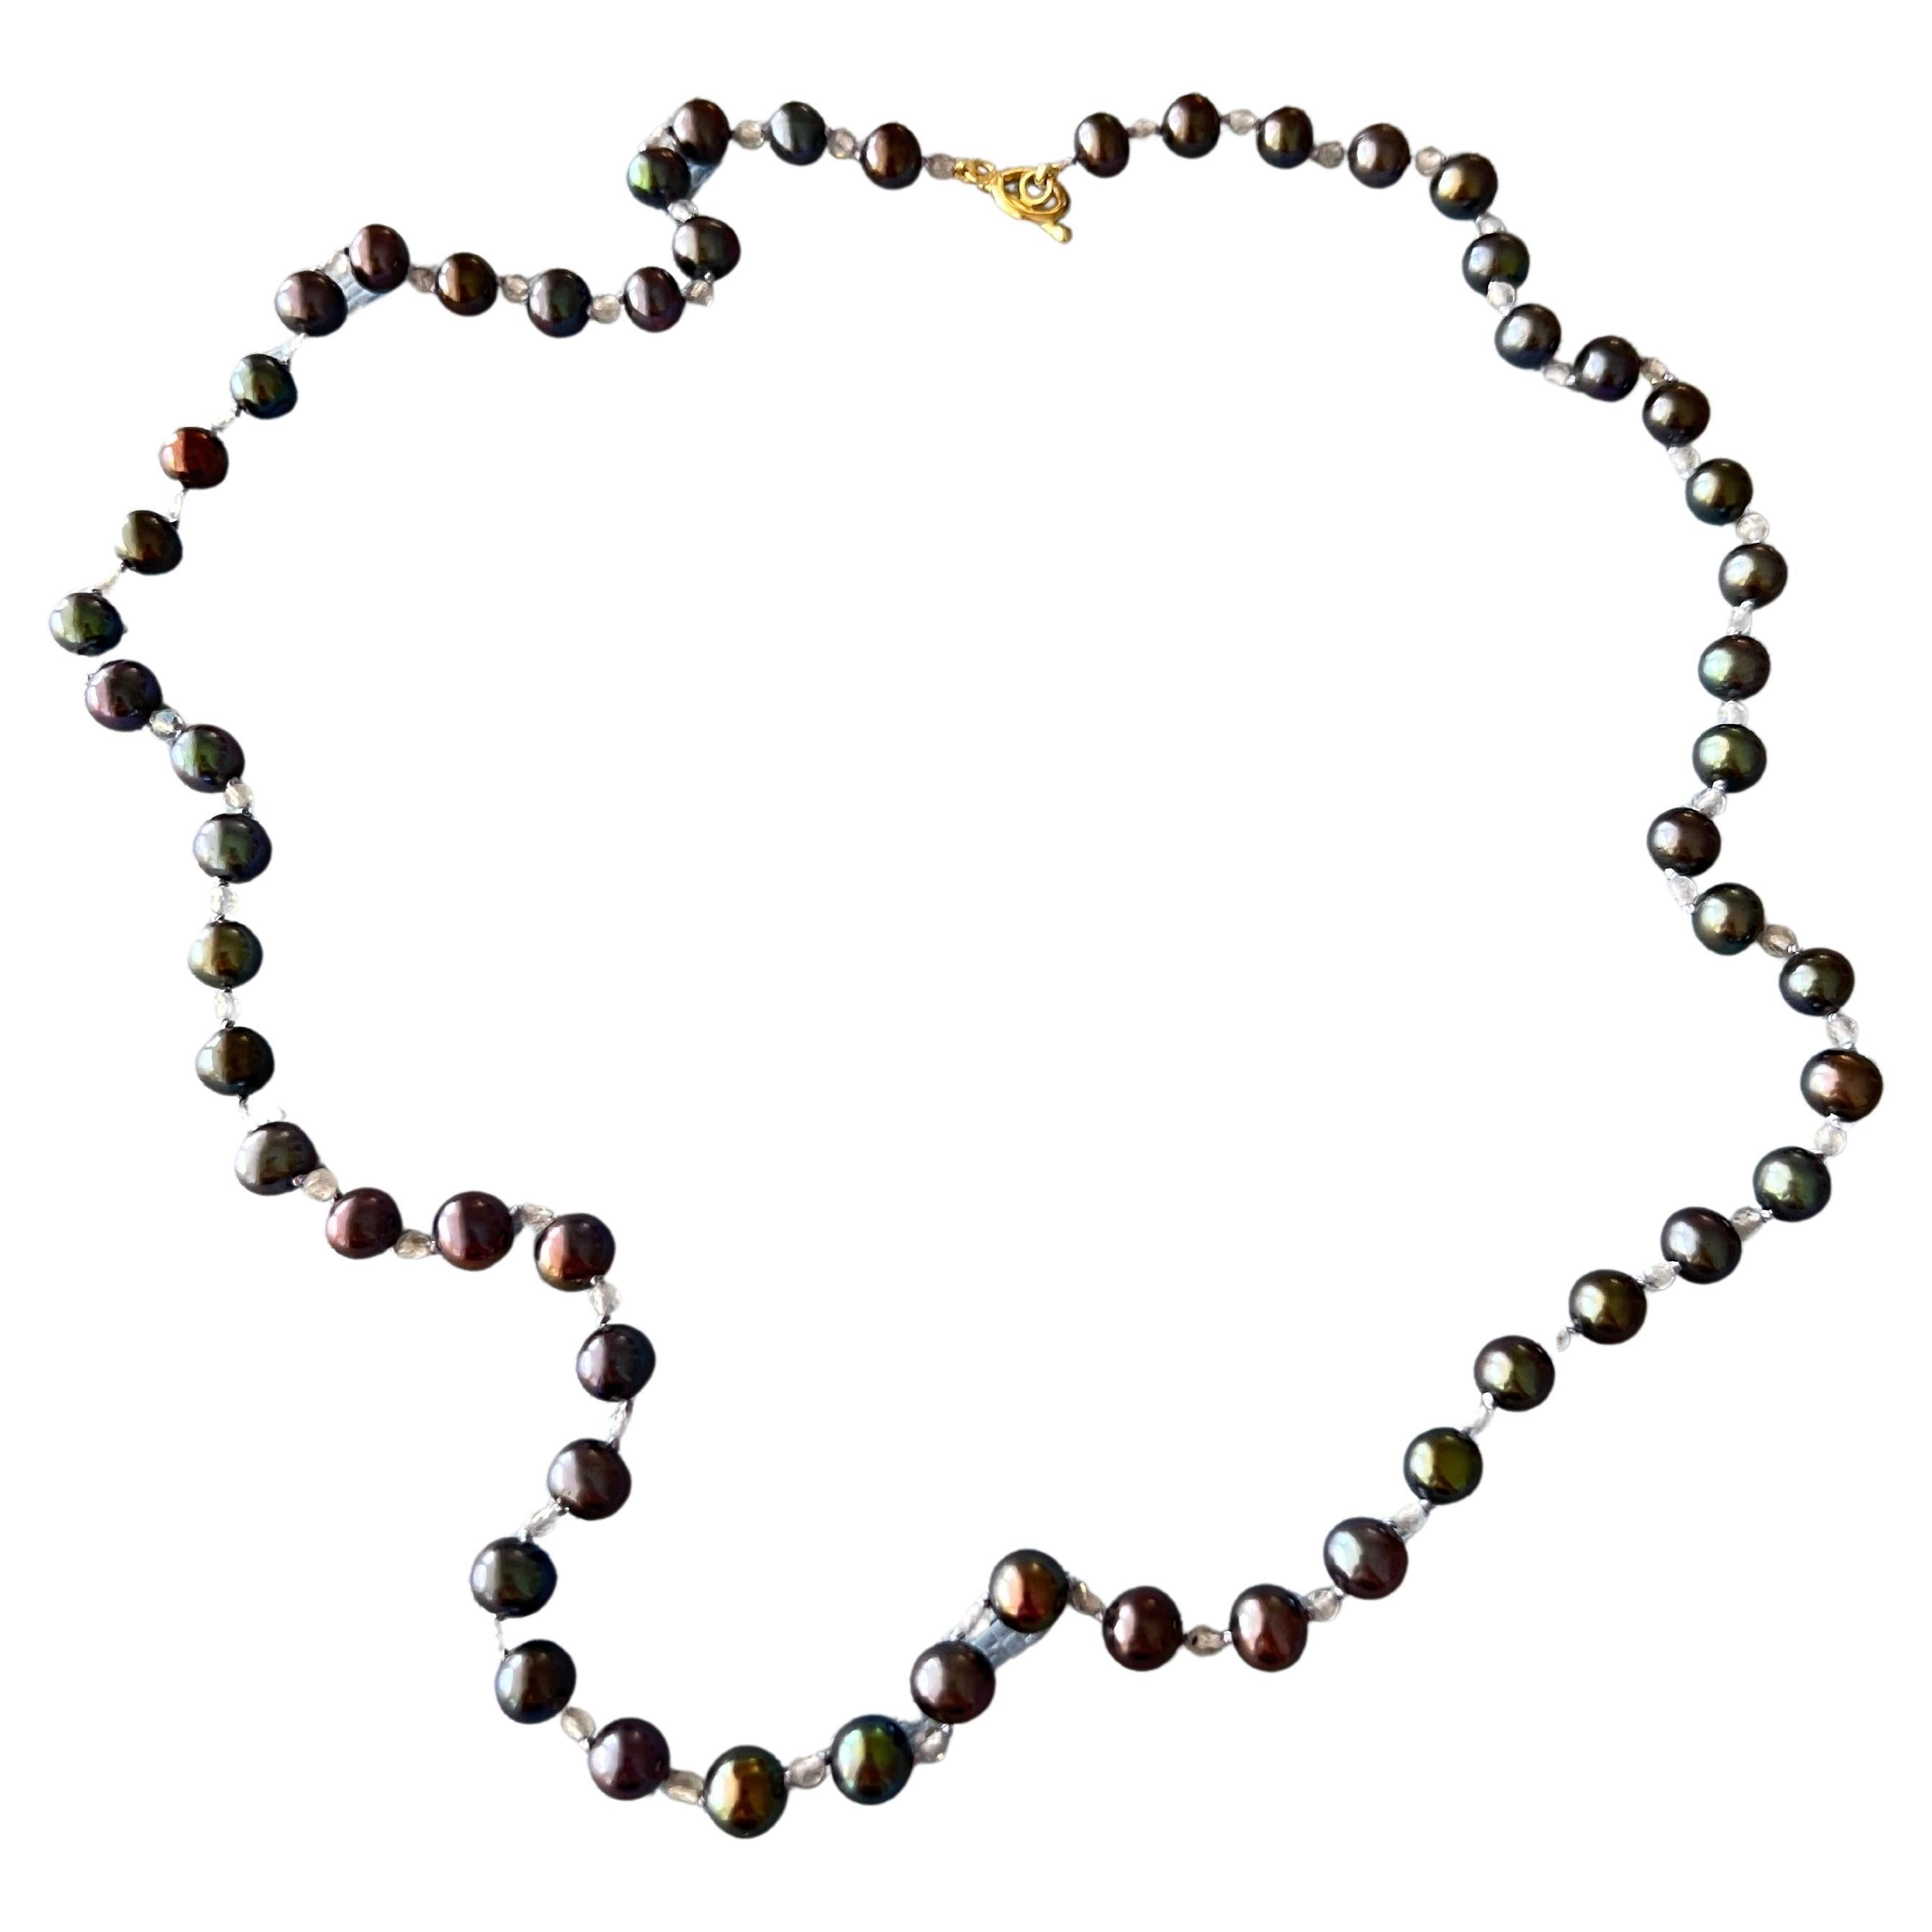 Romantic  Black Pearl Labradorite Mid-Length Necklace with Gold Filled Clasp J Dauphin  For Sale